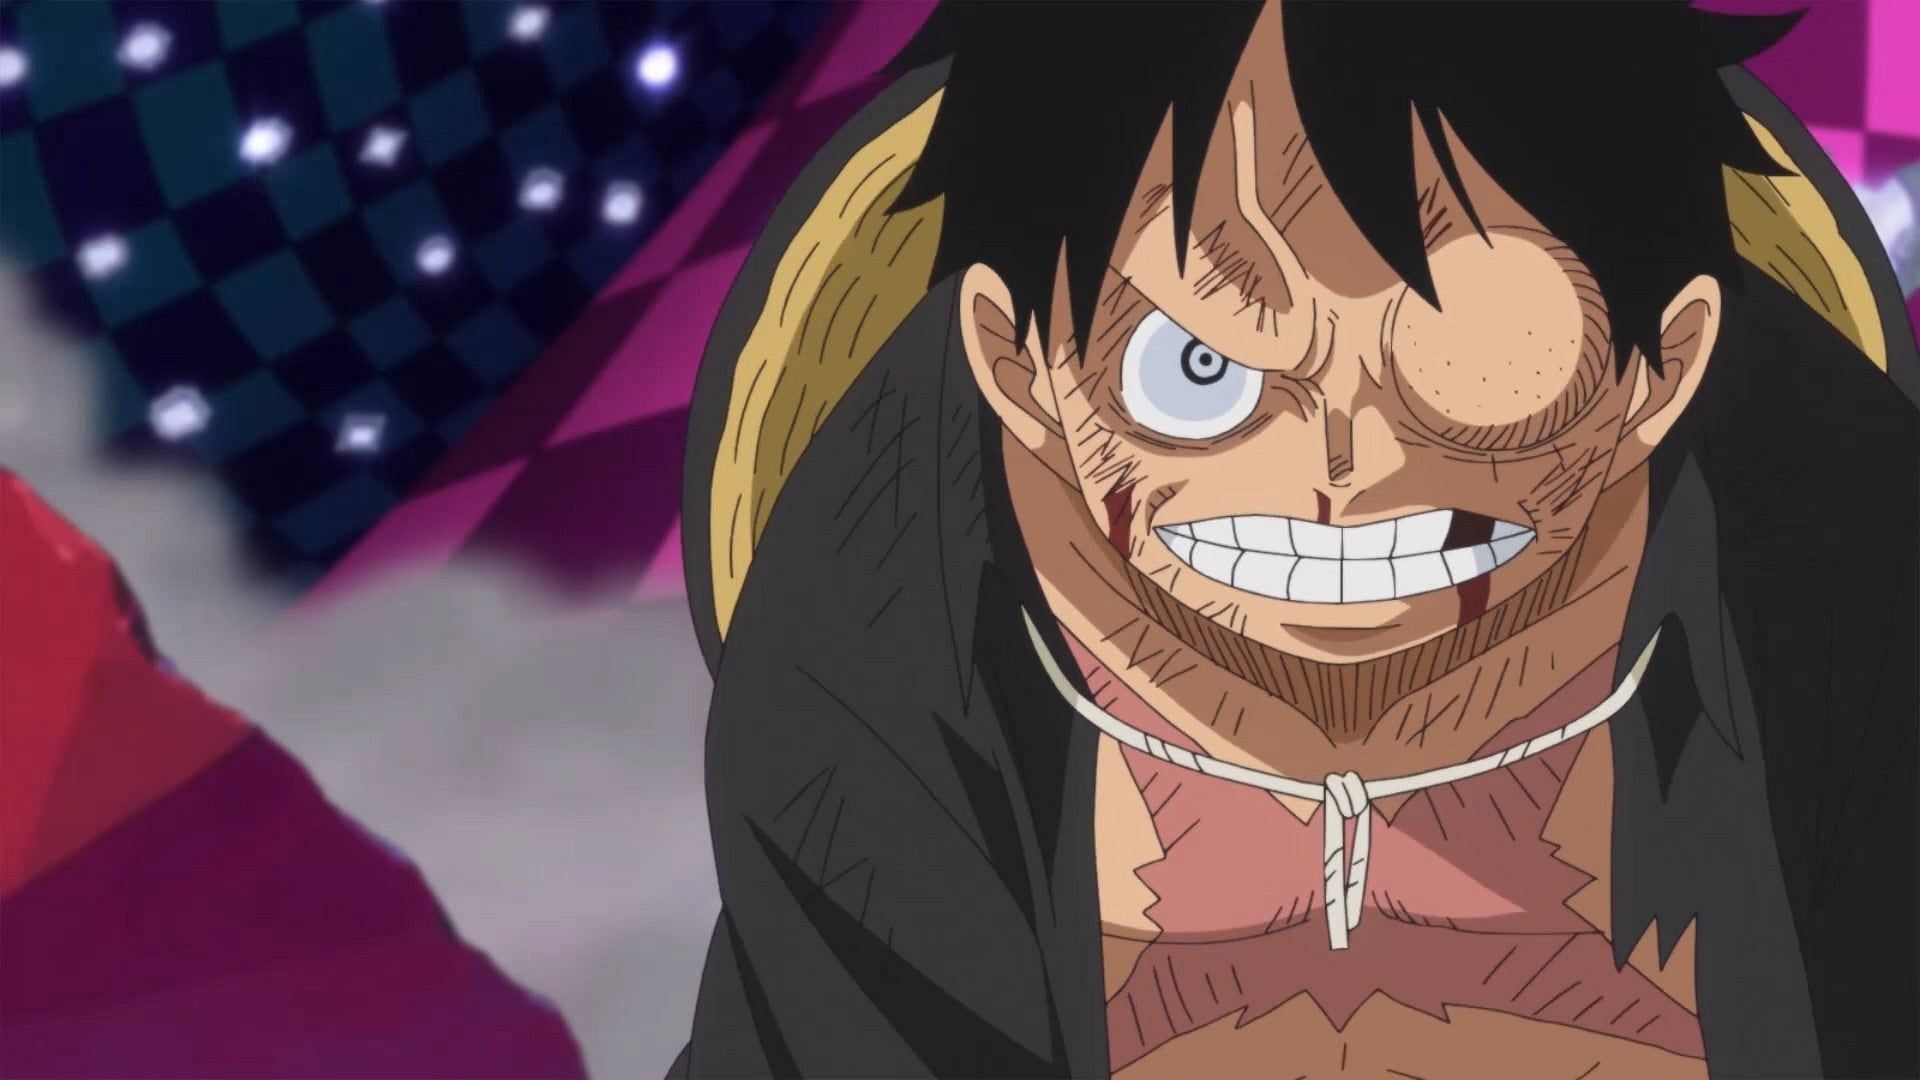 Fans are worried for Luffy&#039;s fate with the latest Chapter 1052 tease (Image Credits: Eiichiro Oda/Shueisha, Viz Media, One Piece)